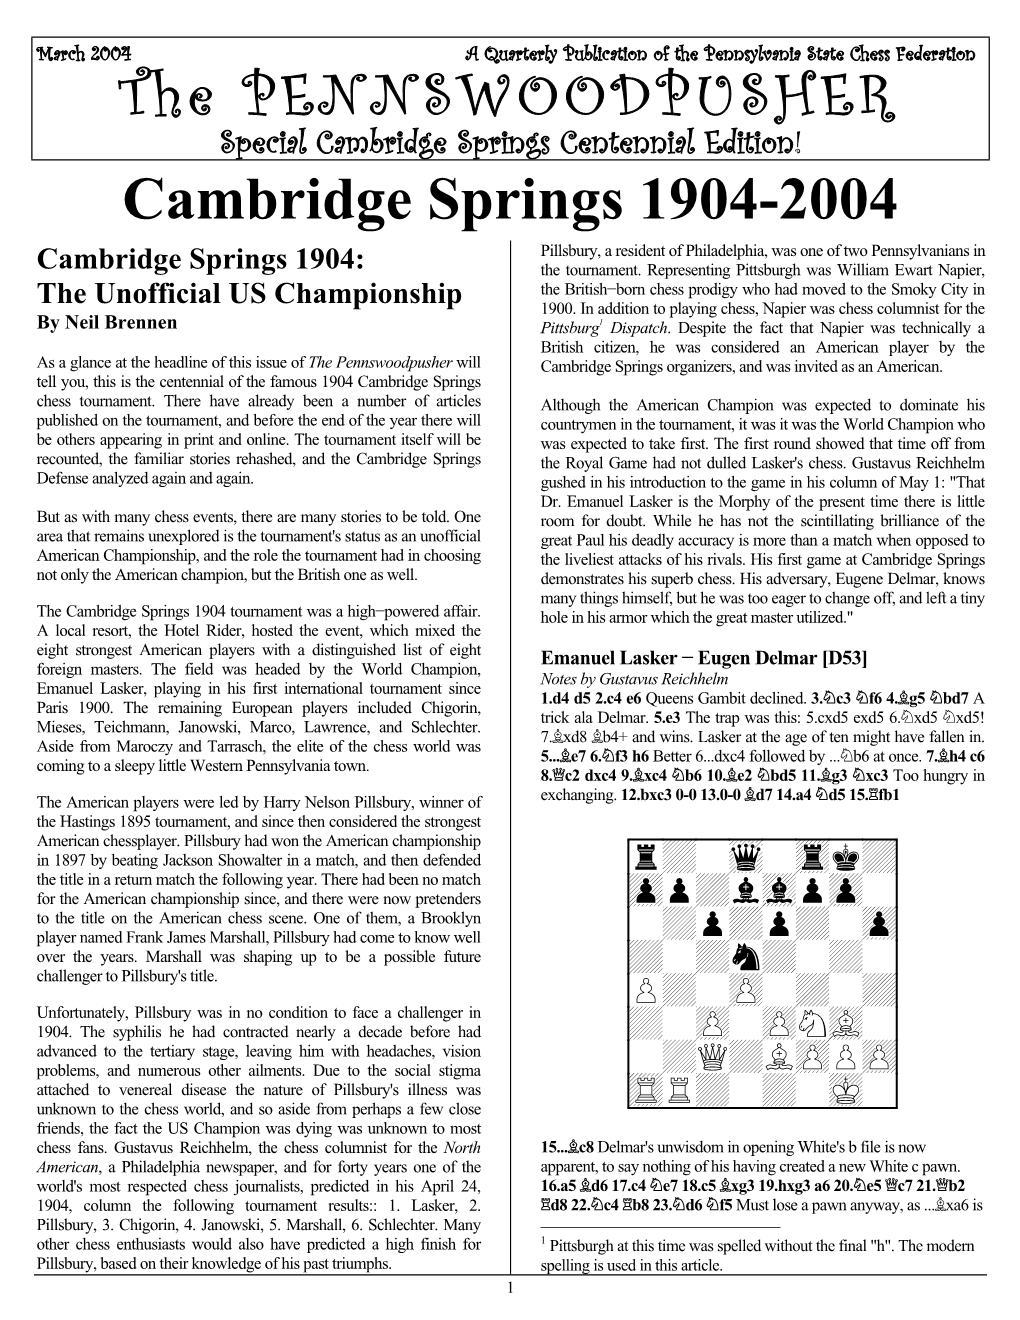 The PENNSWOODPUSHER Cambridge Springs 1904-2004